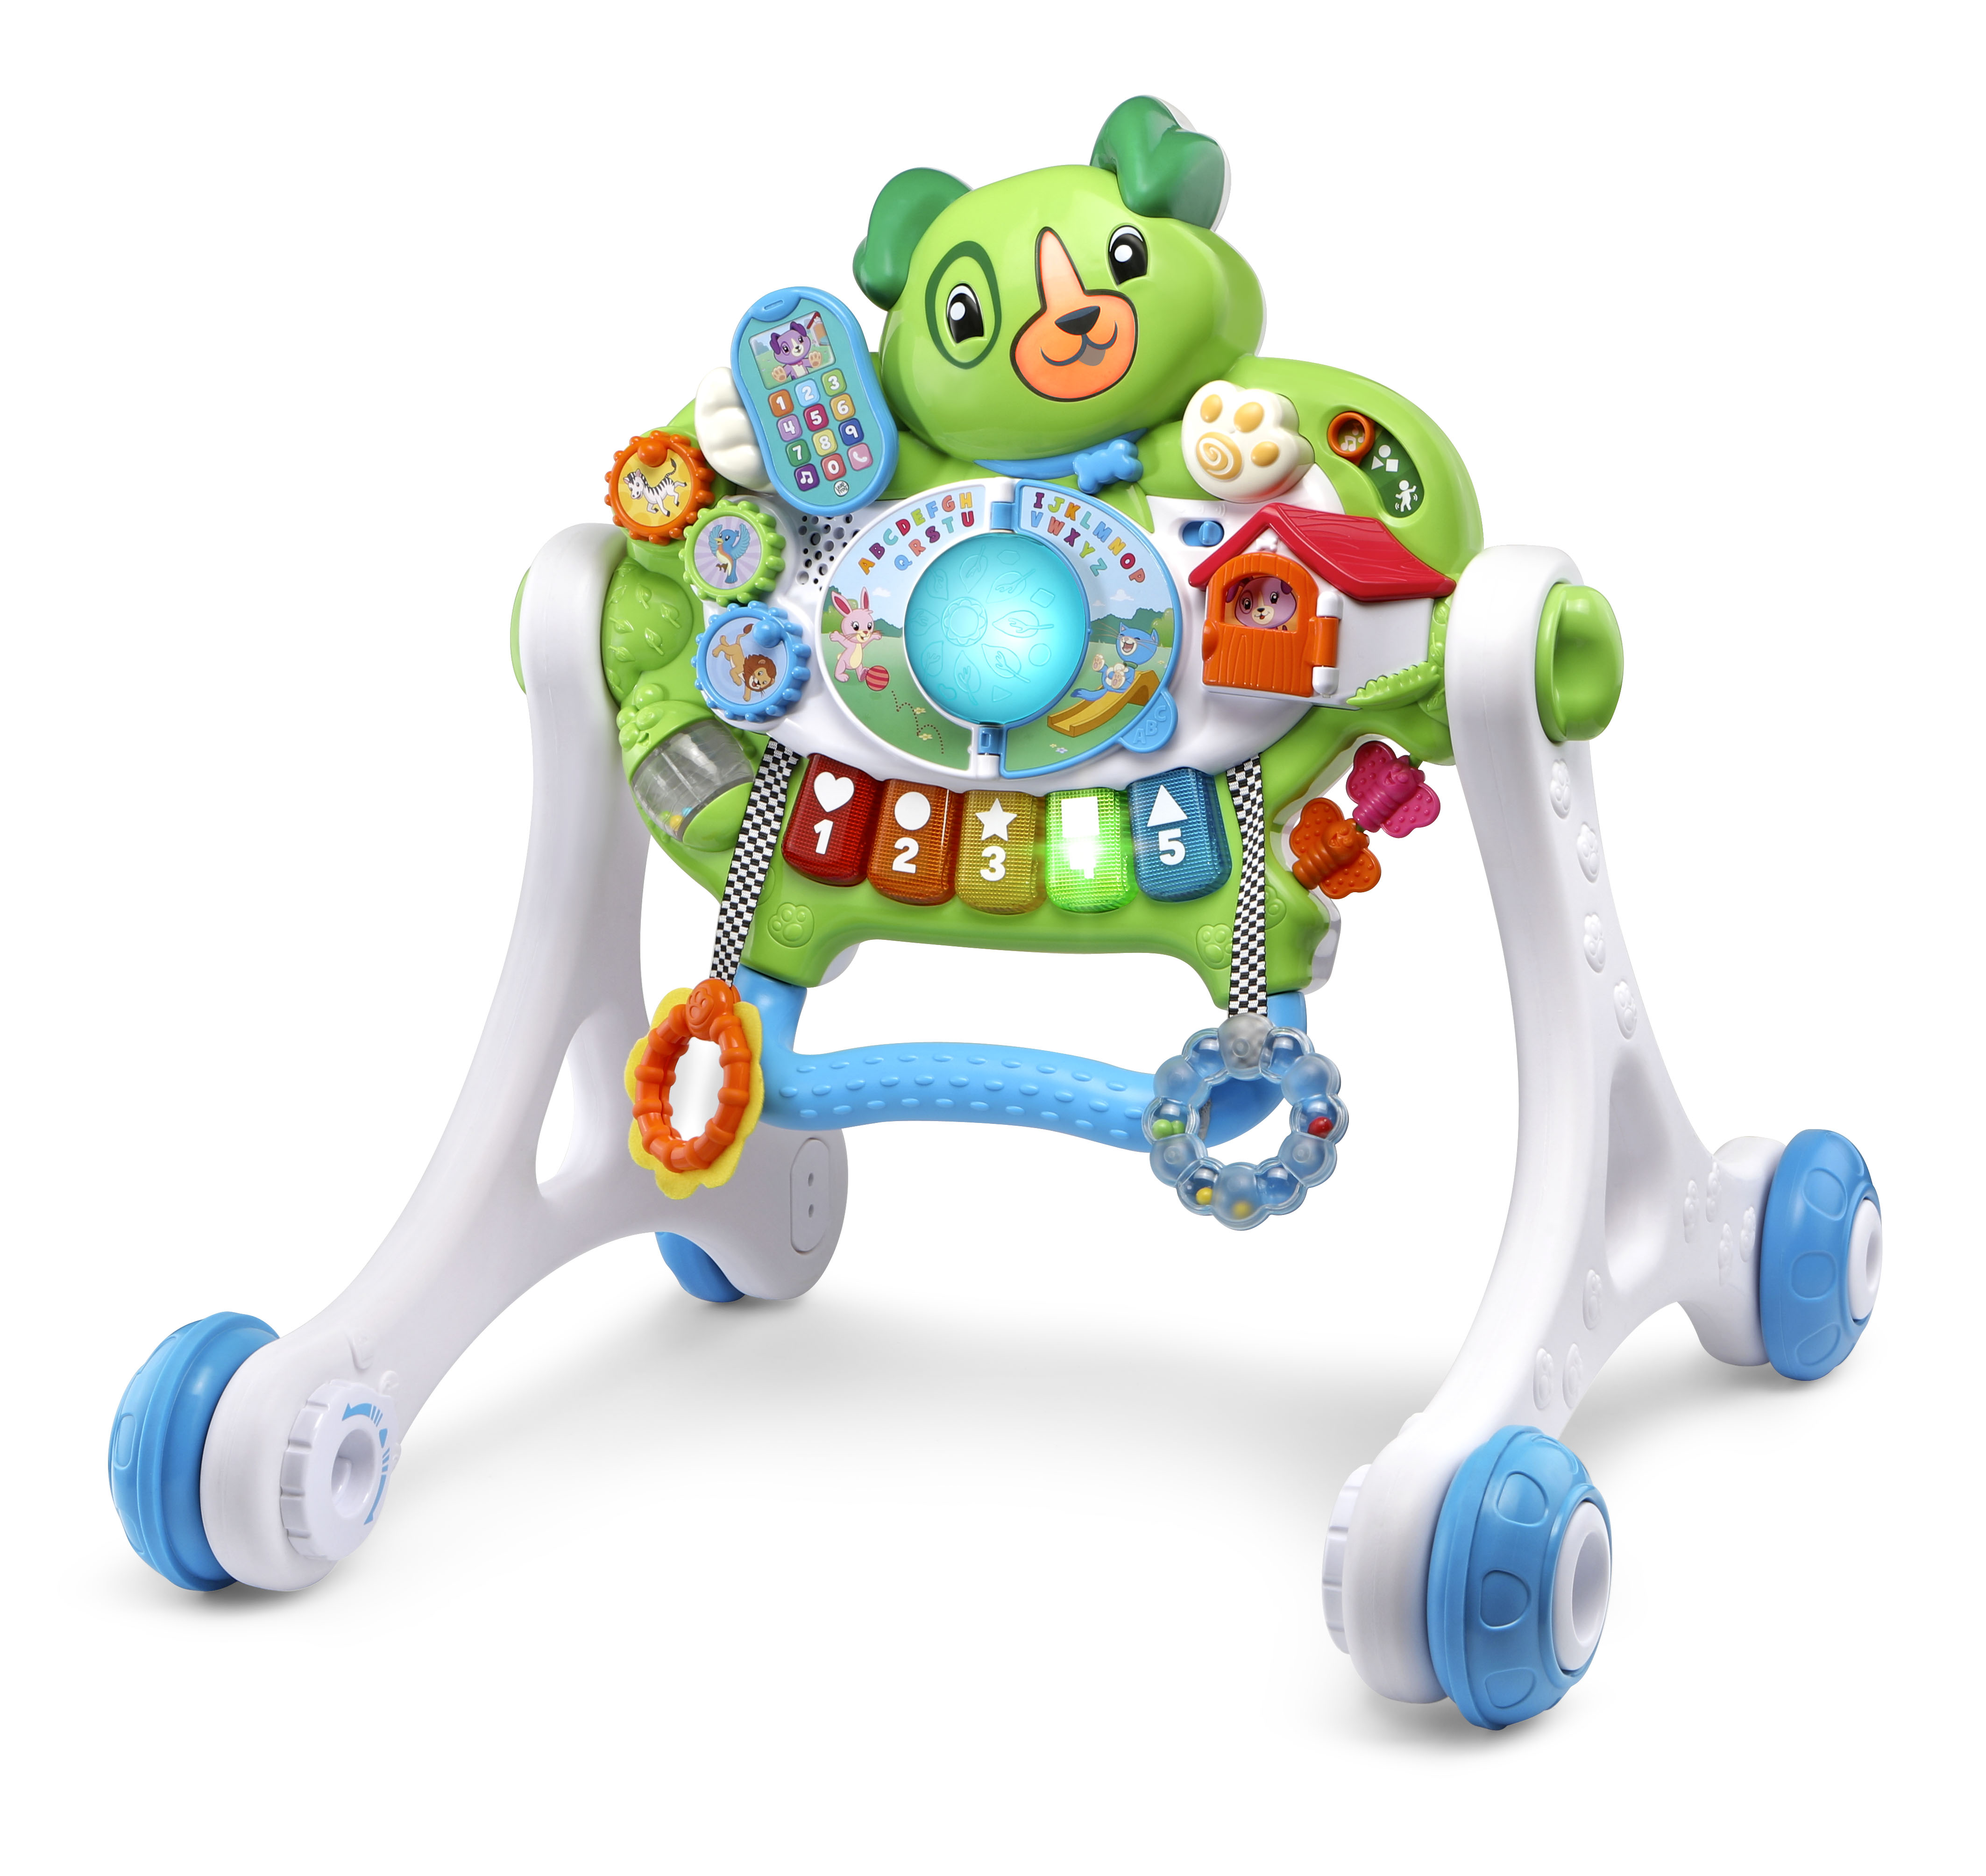 Scout's 3-in-1 Get Up and Go Walker, Baby Gym, Floor Play Toy, Green - image 2 of 11